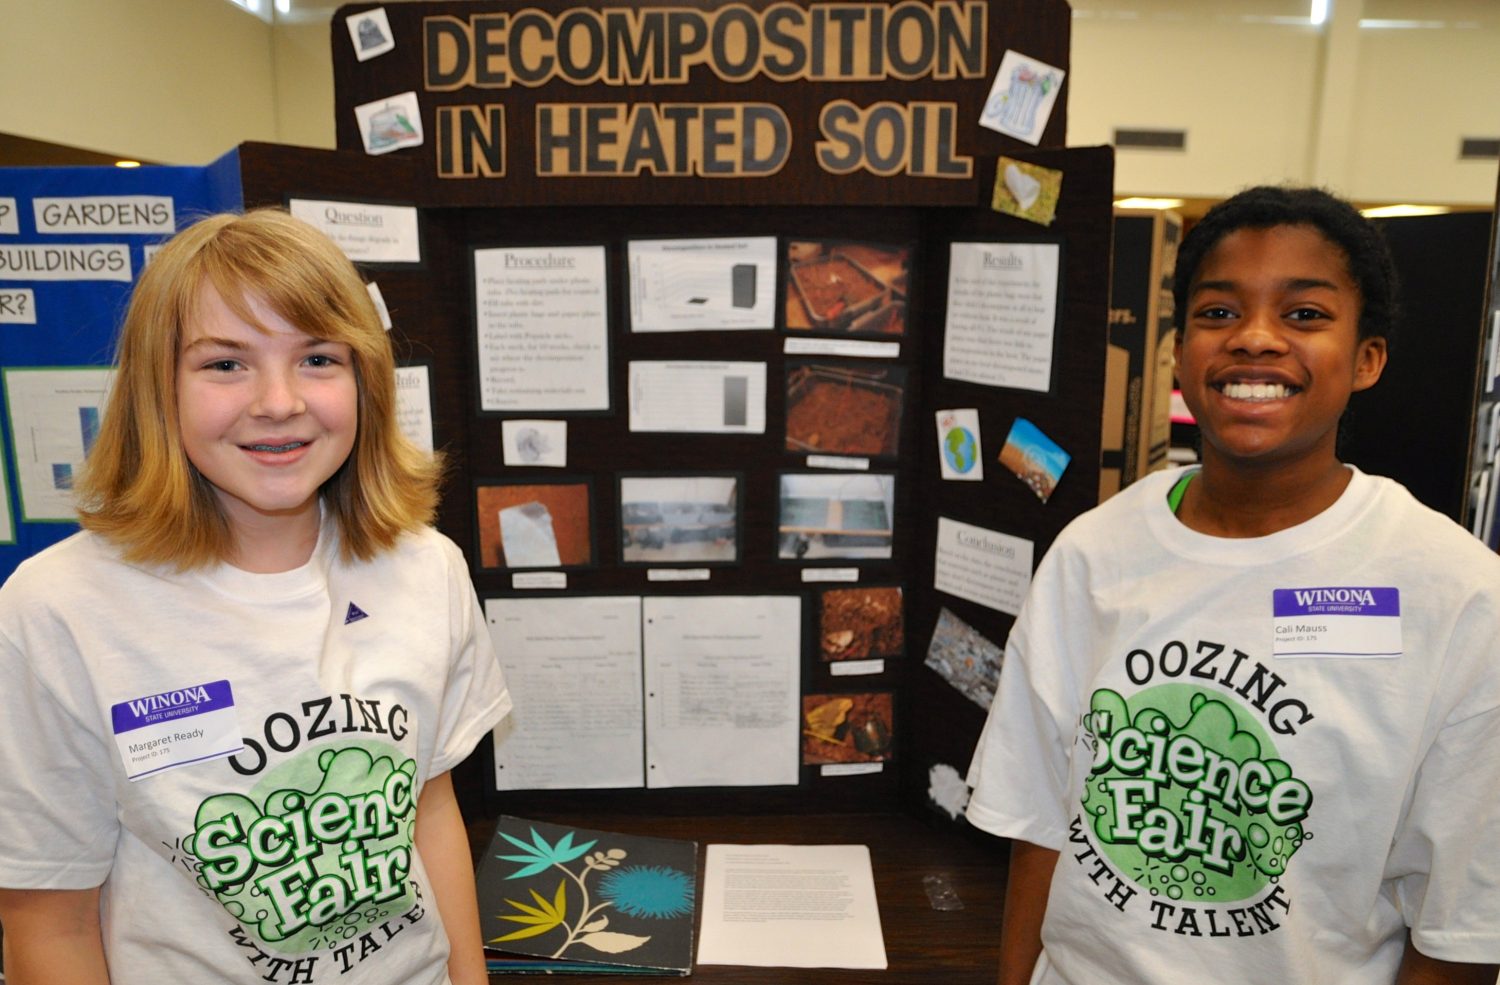 Elementary school students presented various projects on a range of topics during the science fair.
Bartholome Rondet/Winonan